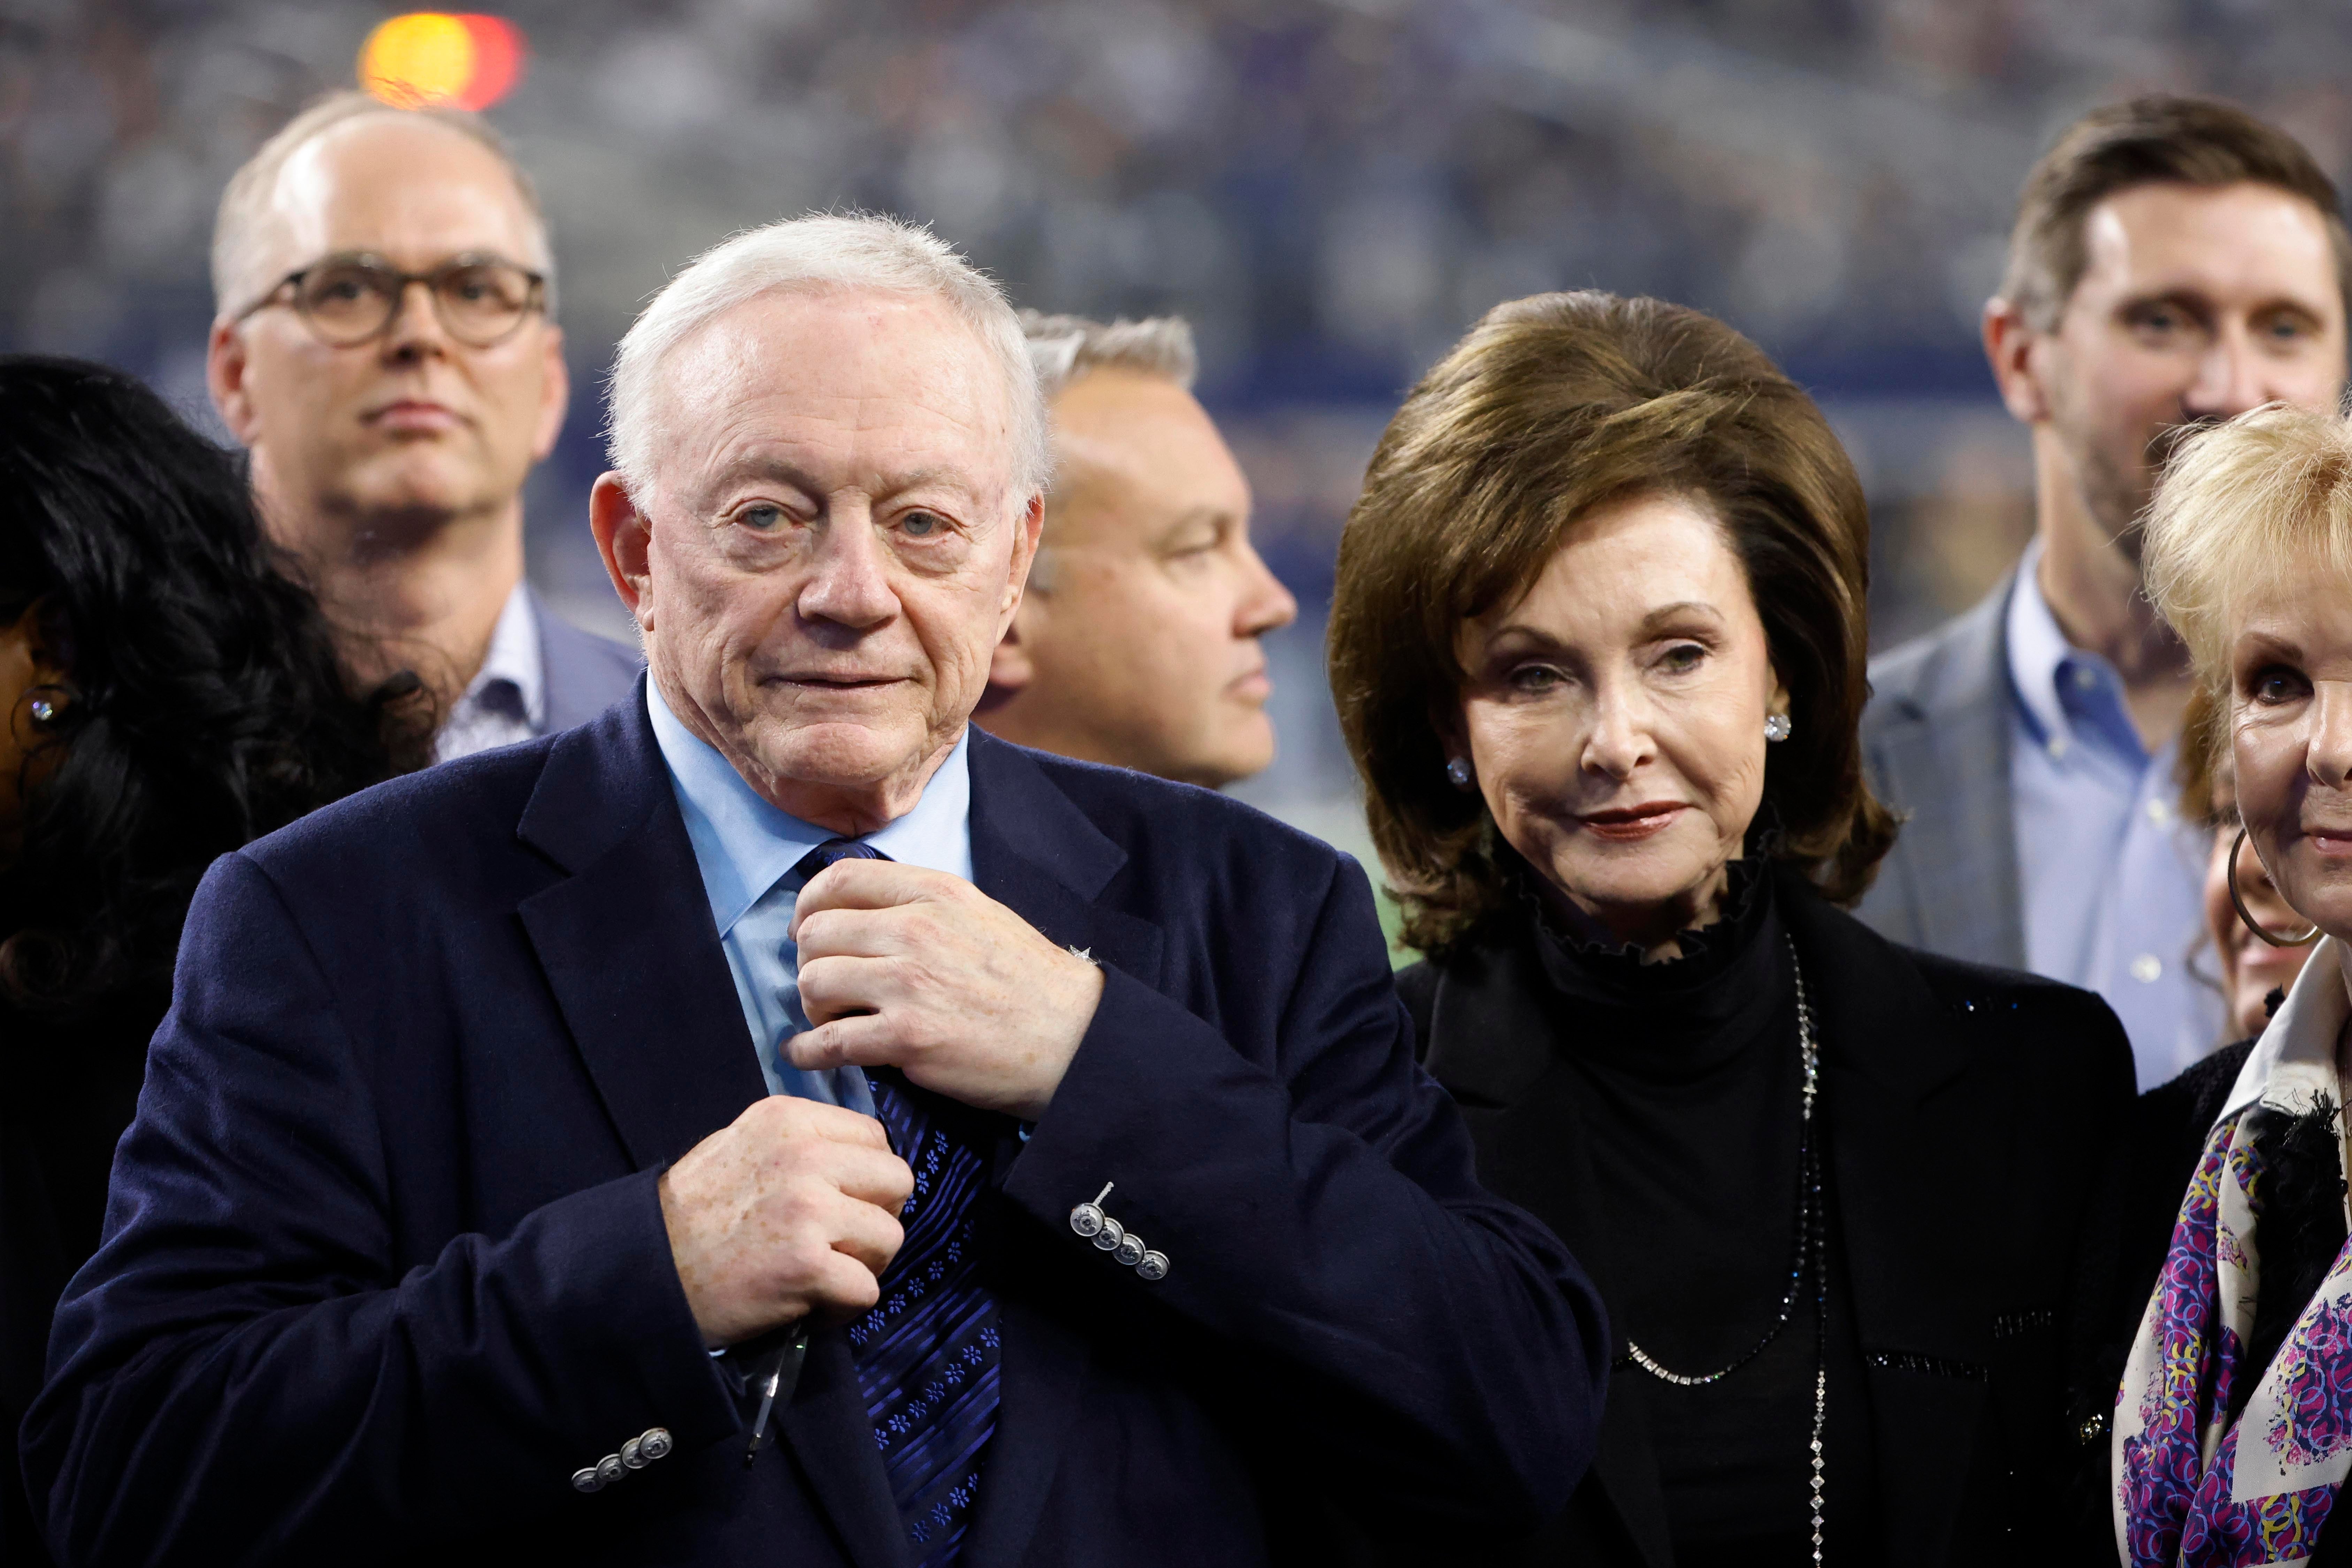 Dallas Cowboys owner Jerry Jones ordered to take paternity test in legal battle with 26-year-old woman The Independent